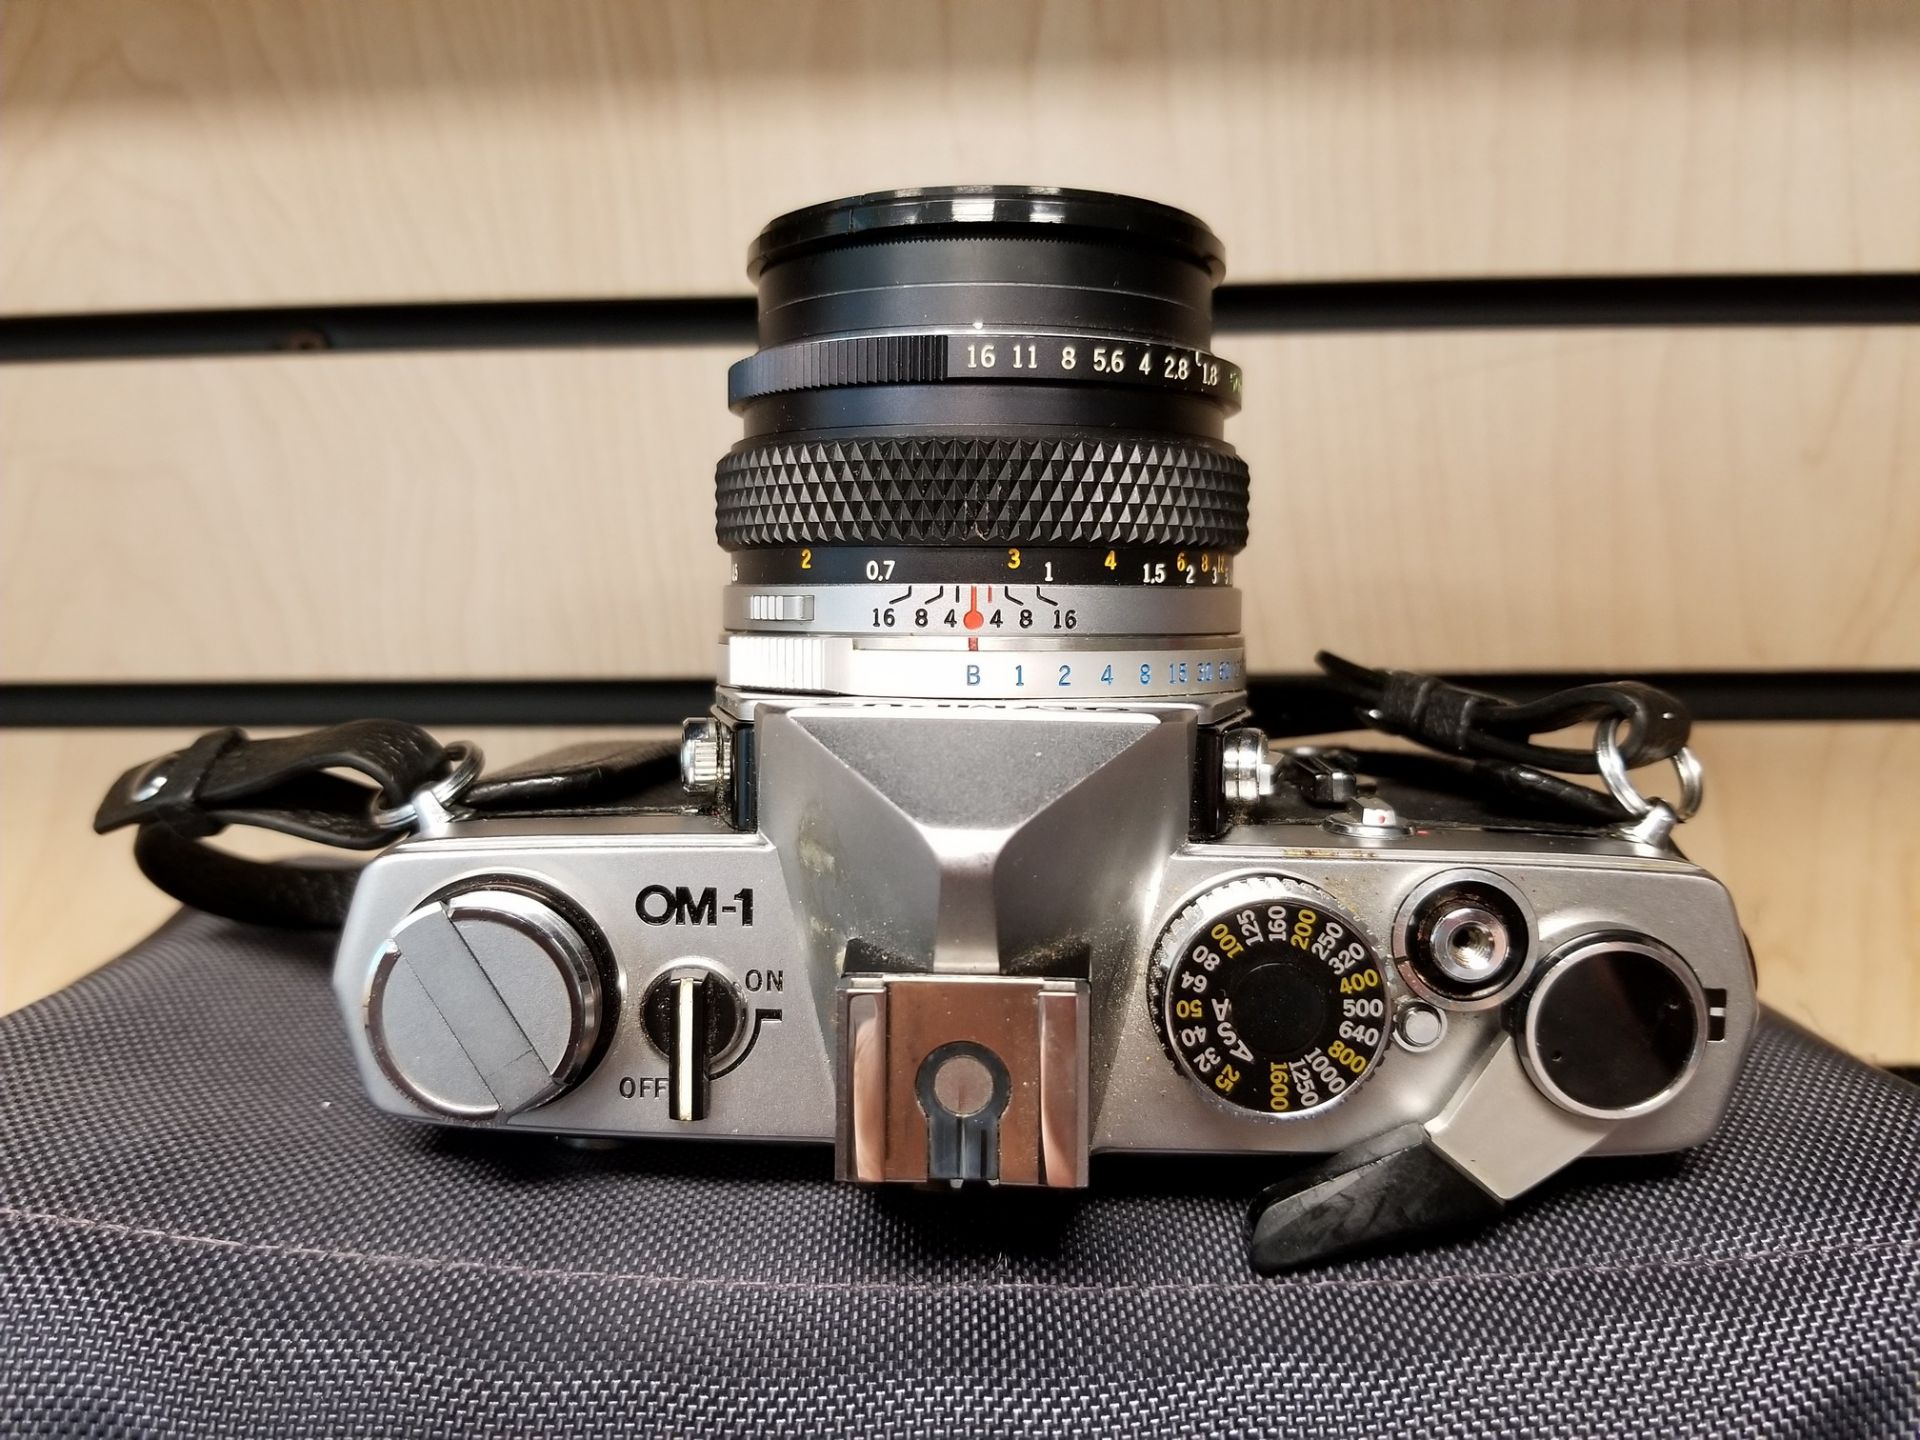 OLYMPUS OM-1 VINTAGE SLR CAMERA WITH VARIOUS FLASH ATTACHMENTS, LENSES AND CARRY CASE - Image 6 of 6